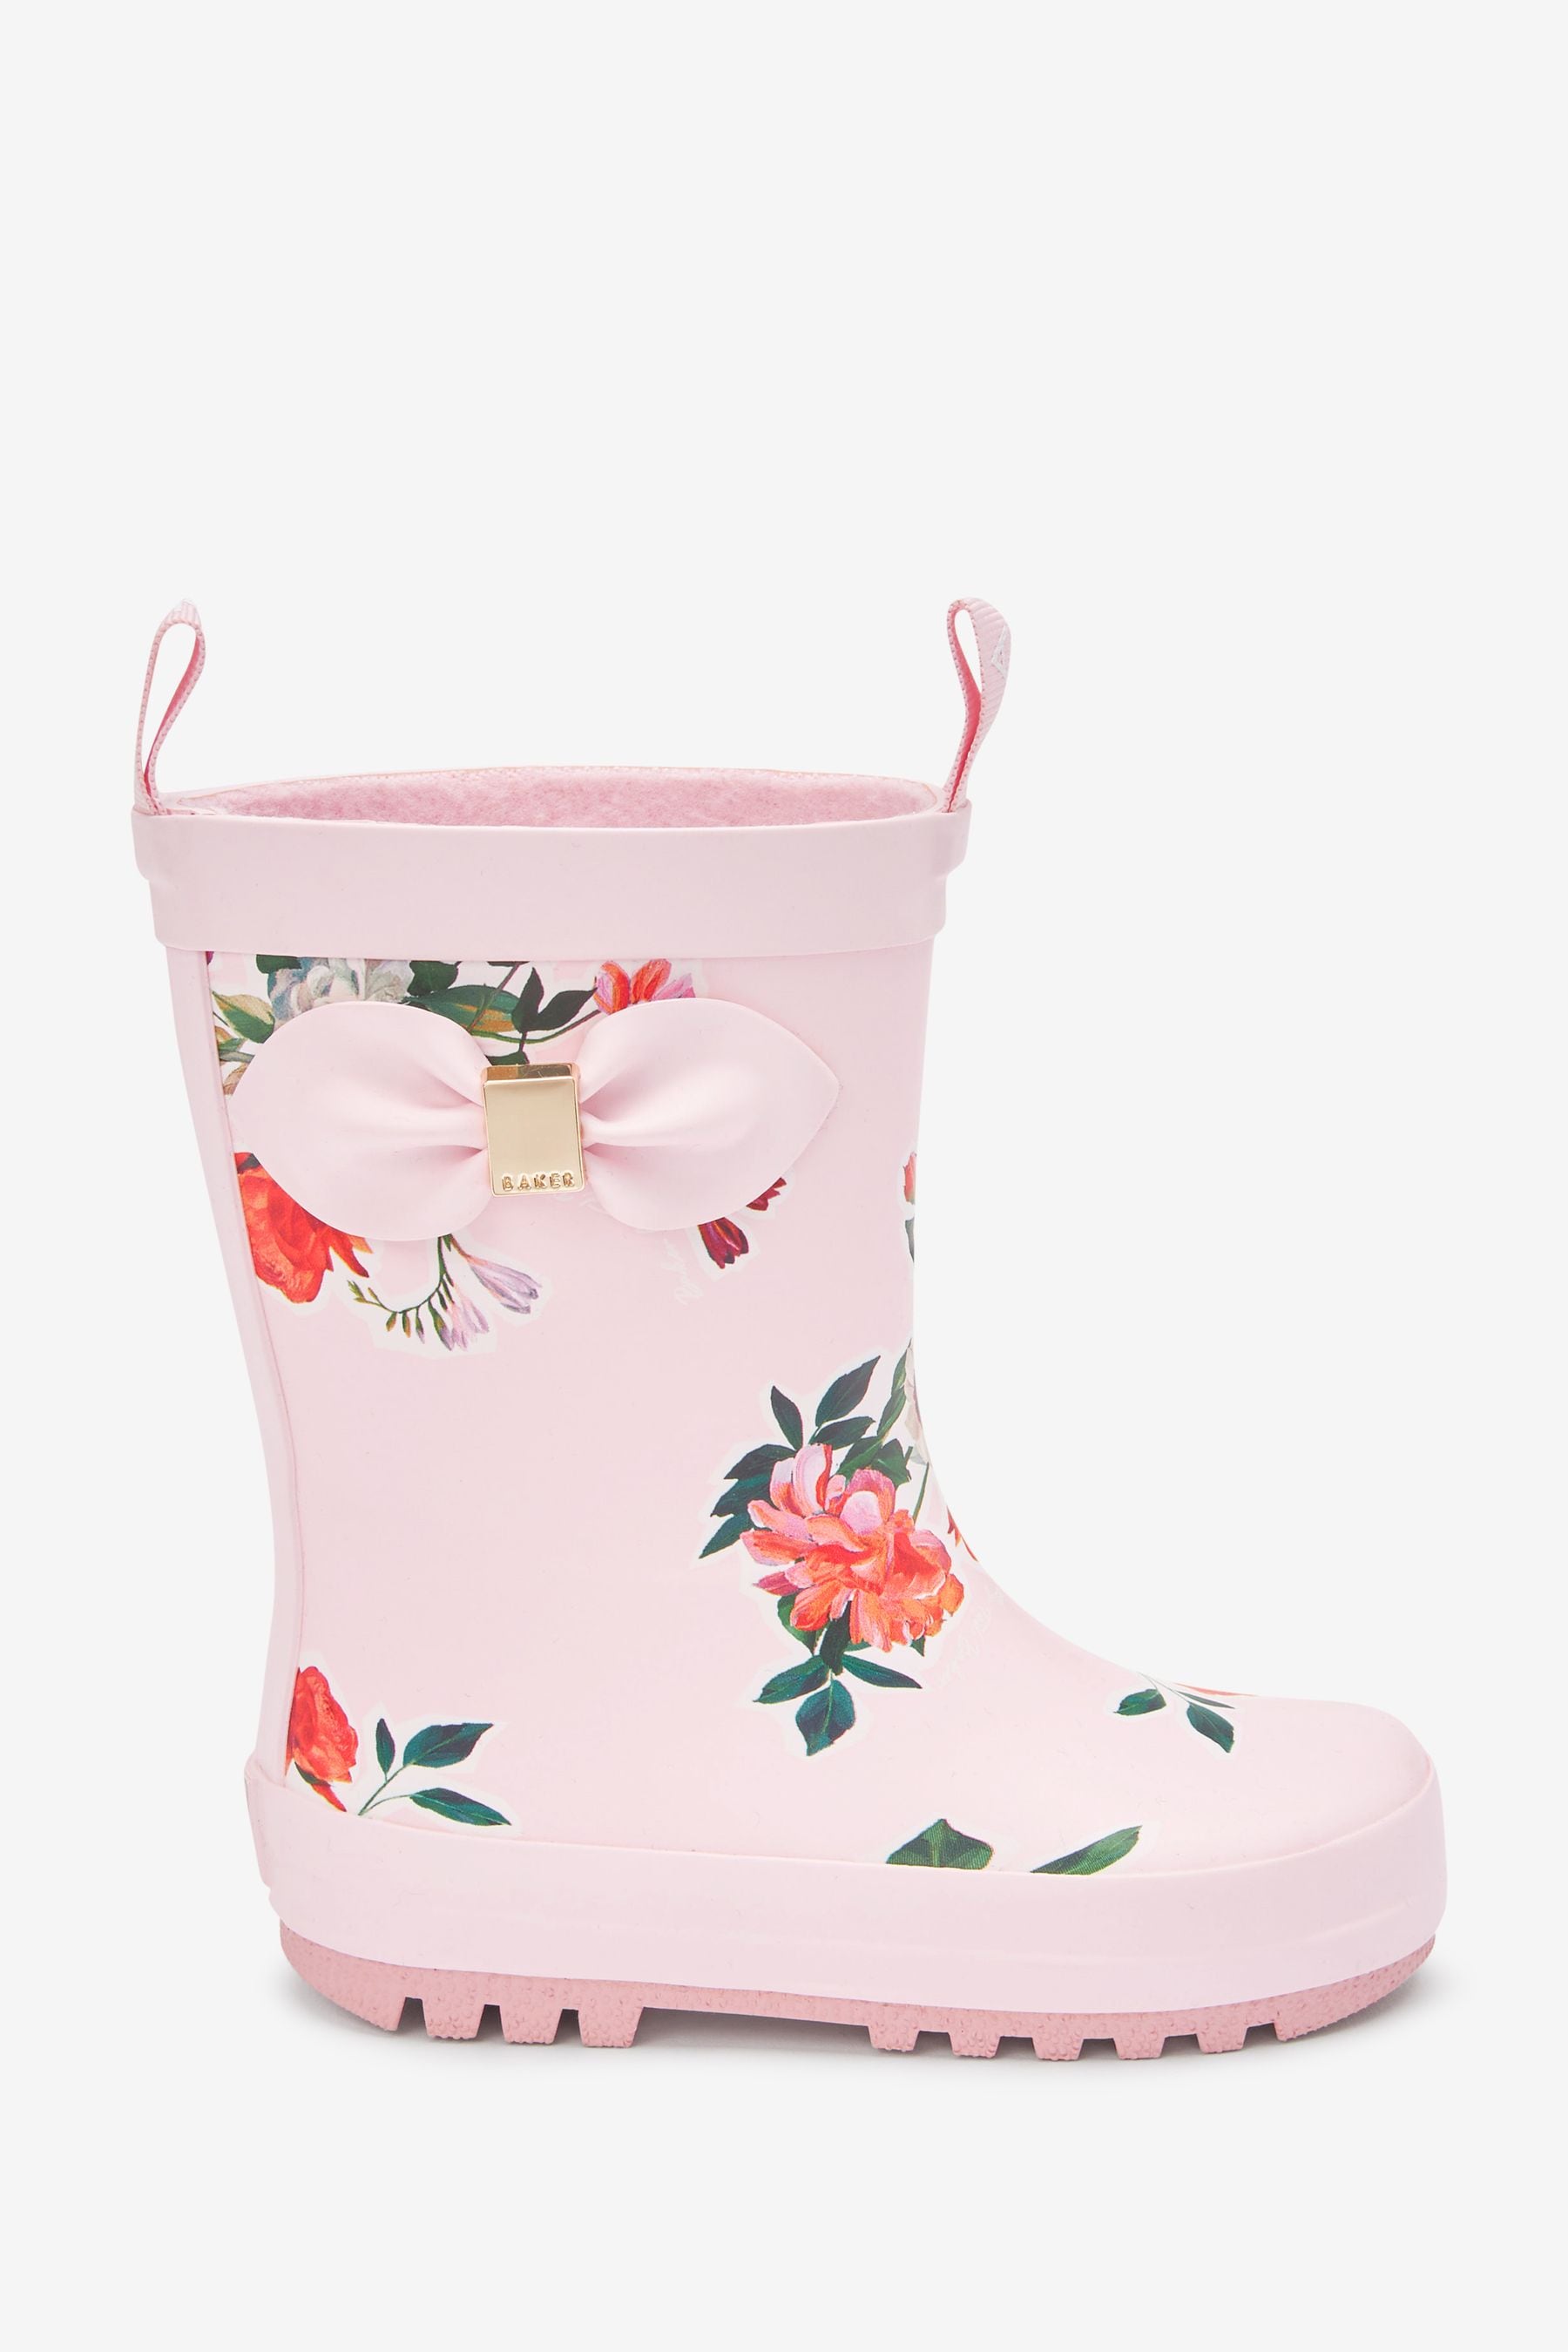 Buy Baker by Ted Baker Pale Pink Floral Welly from Next USA